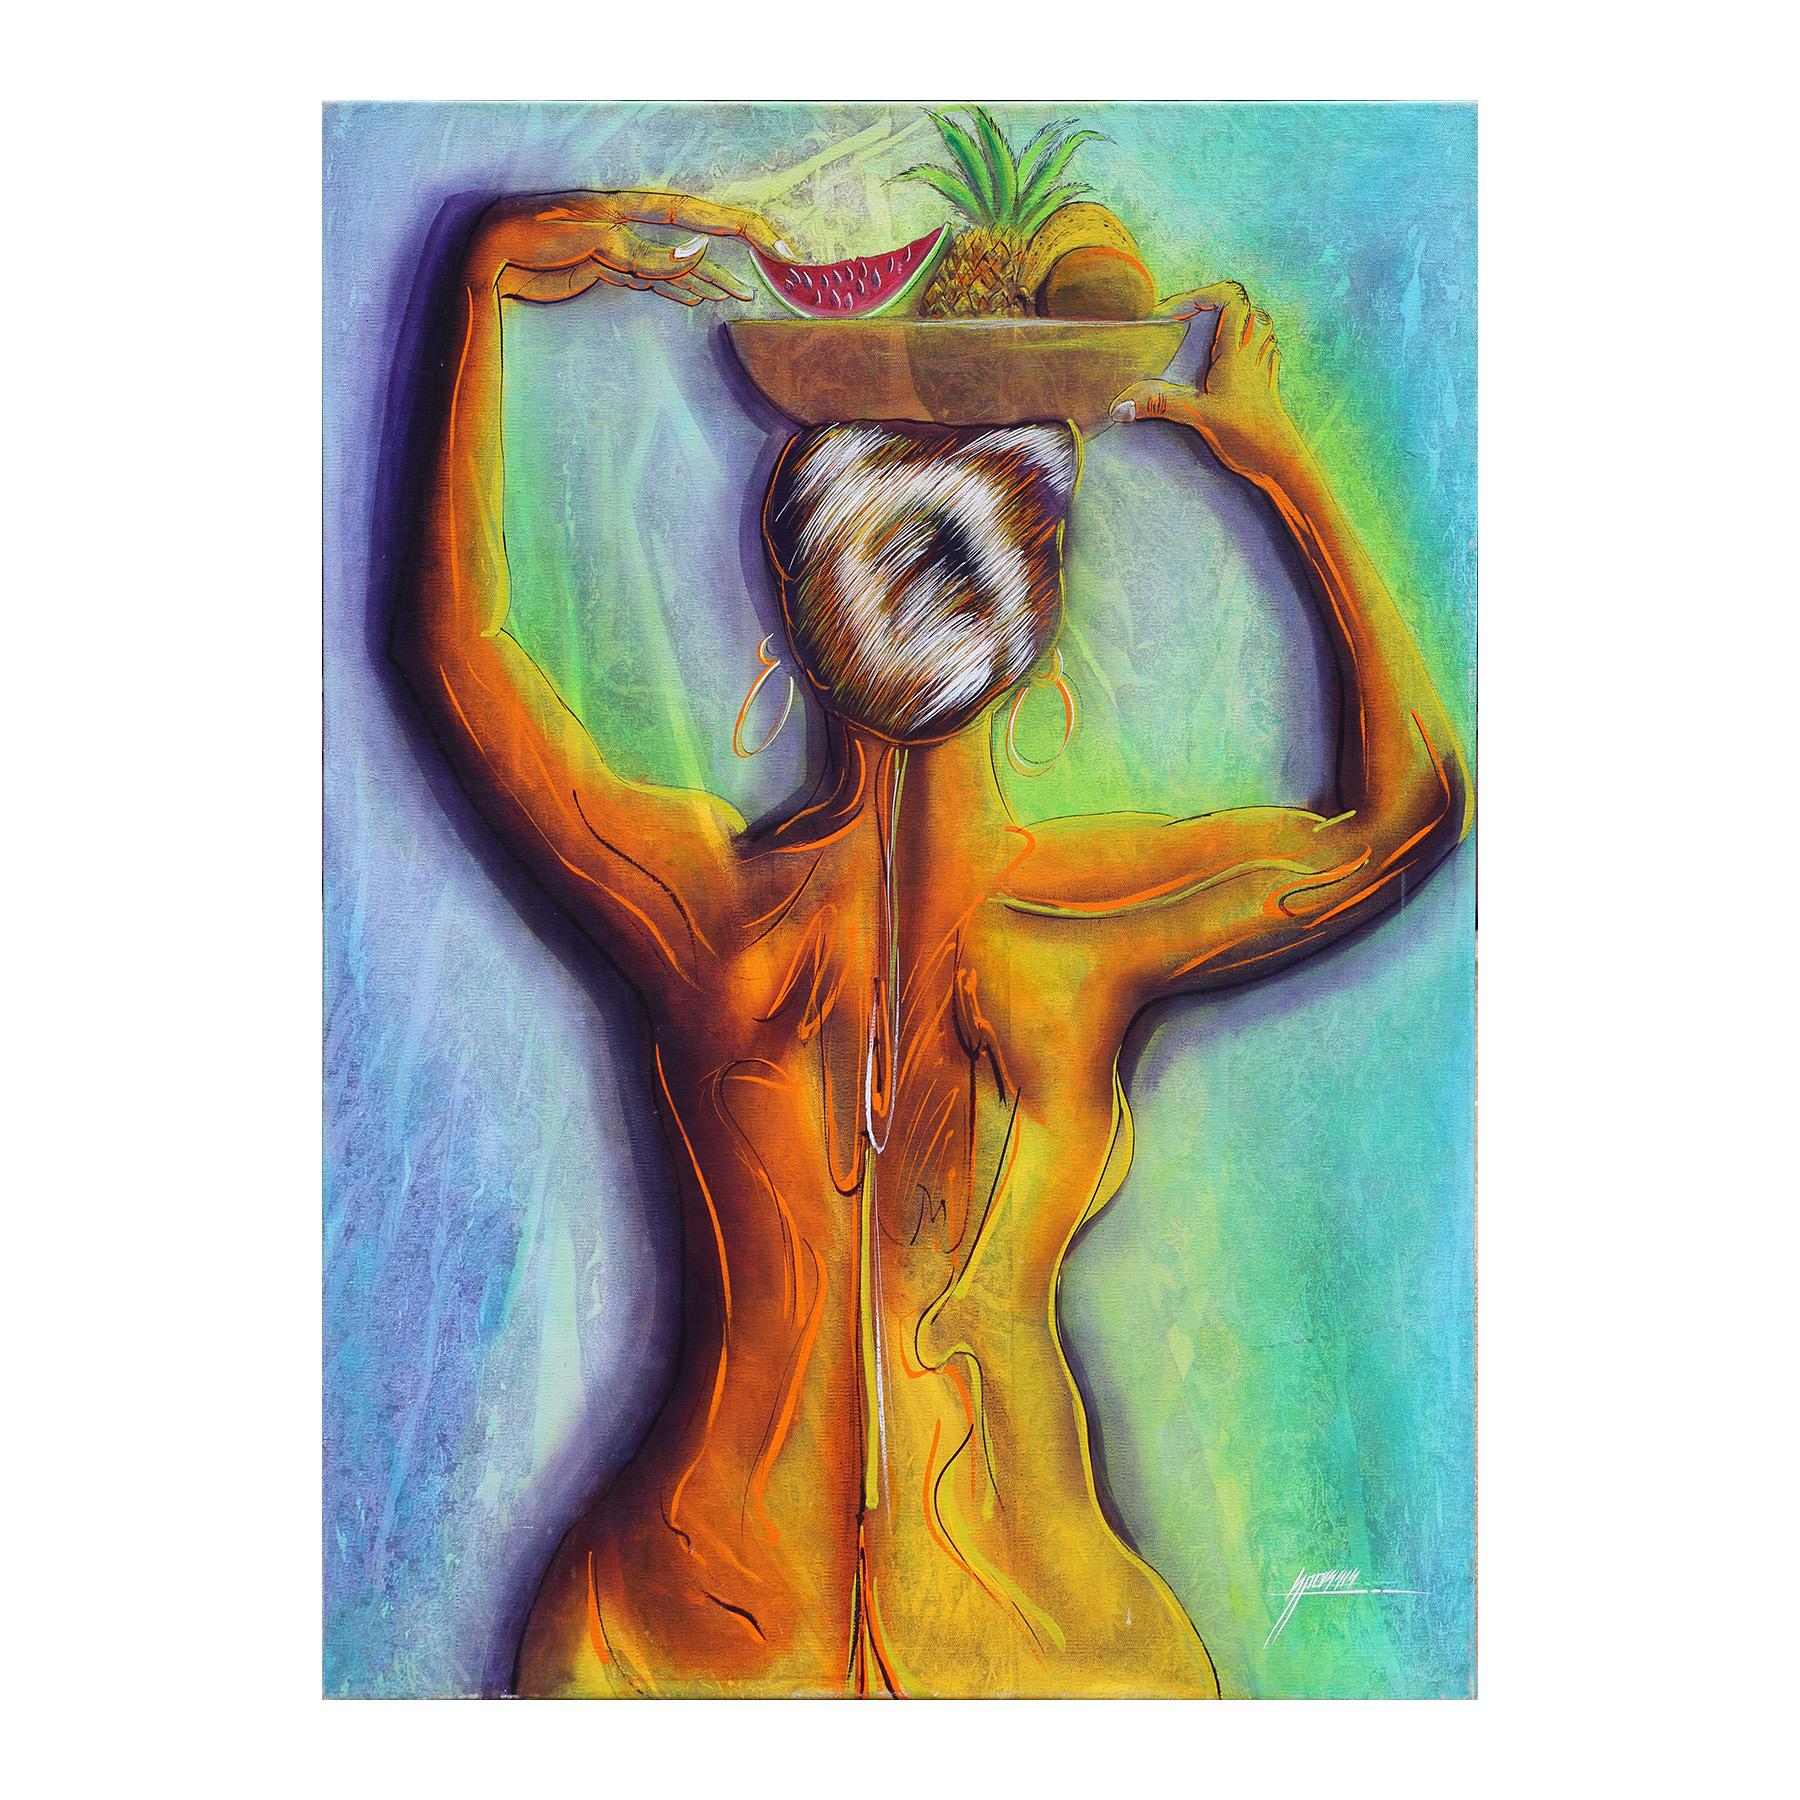 Santander Pacheco Assis Figurative Painting - "Tropicalisima" Venezuelan Abstract Neon Nude Figure with Fruit Bowl on Head 